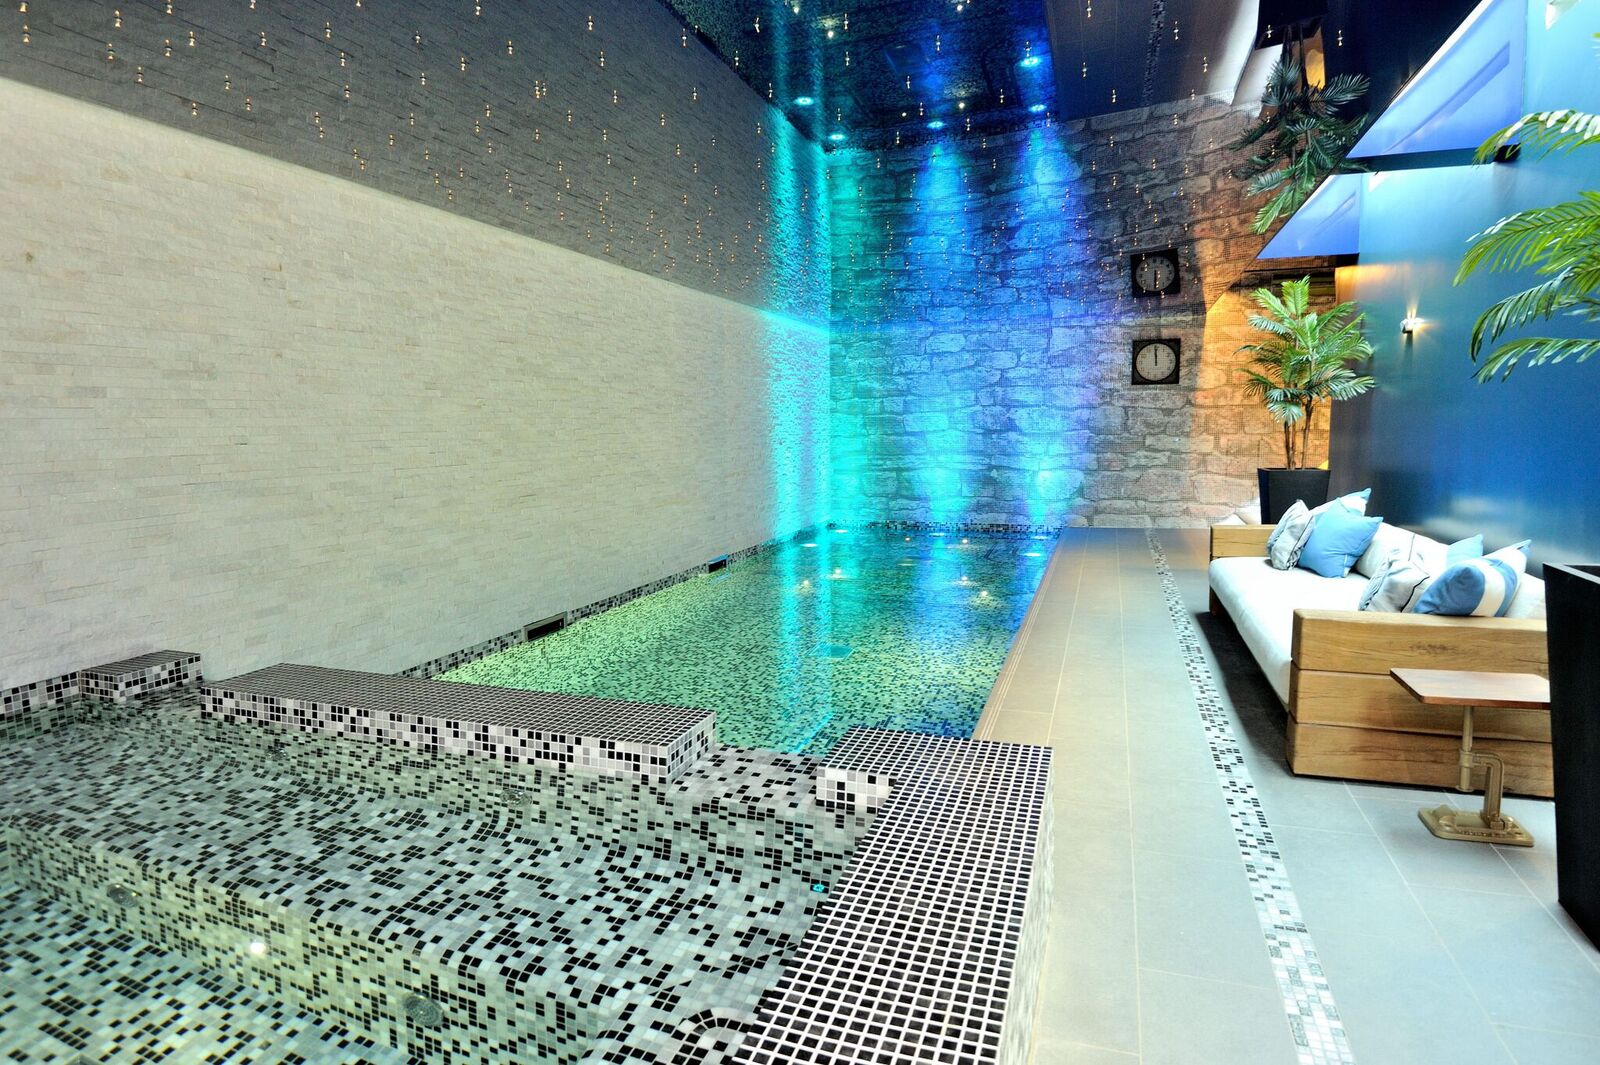 Swim training systems are latest fitness craze for residential swimming pool installations